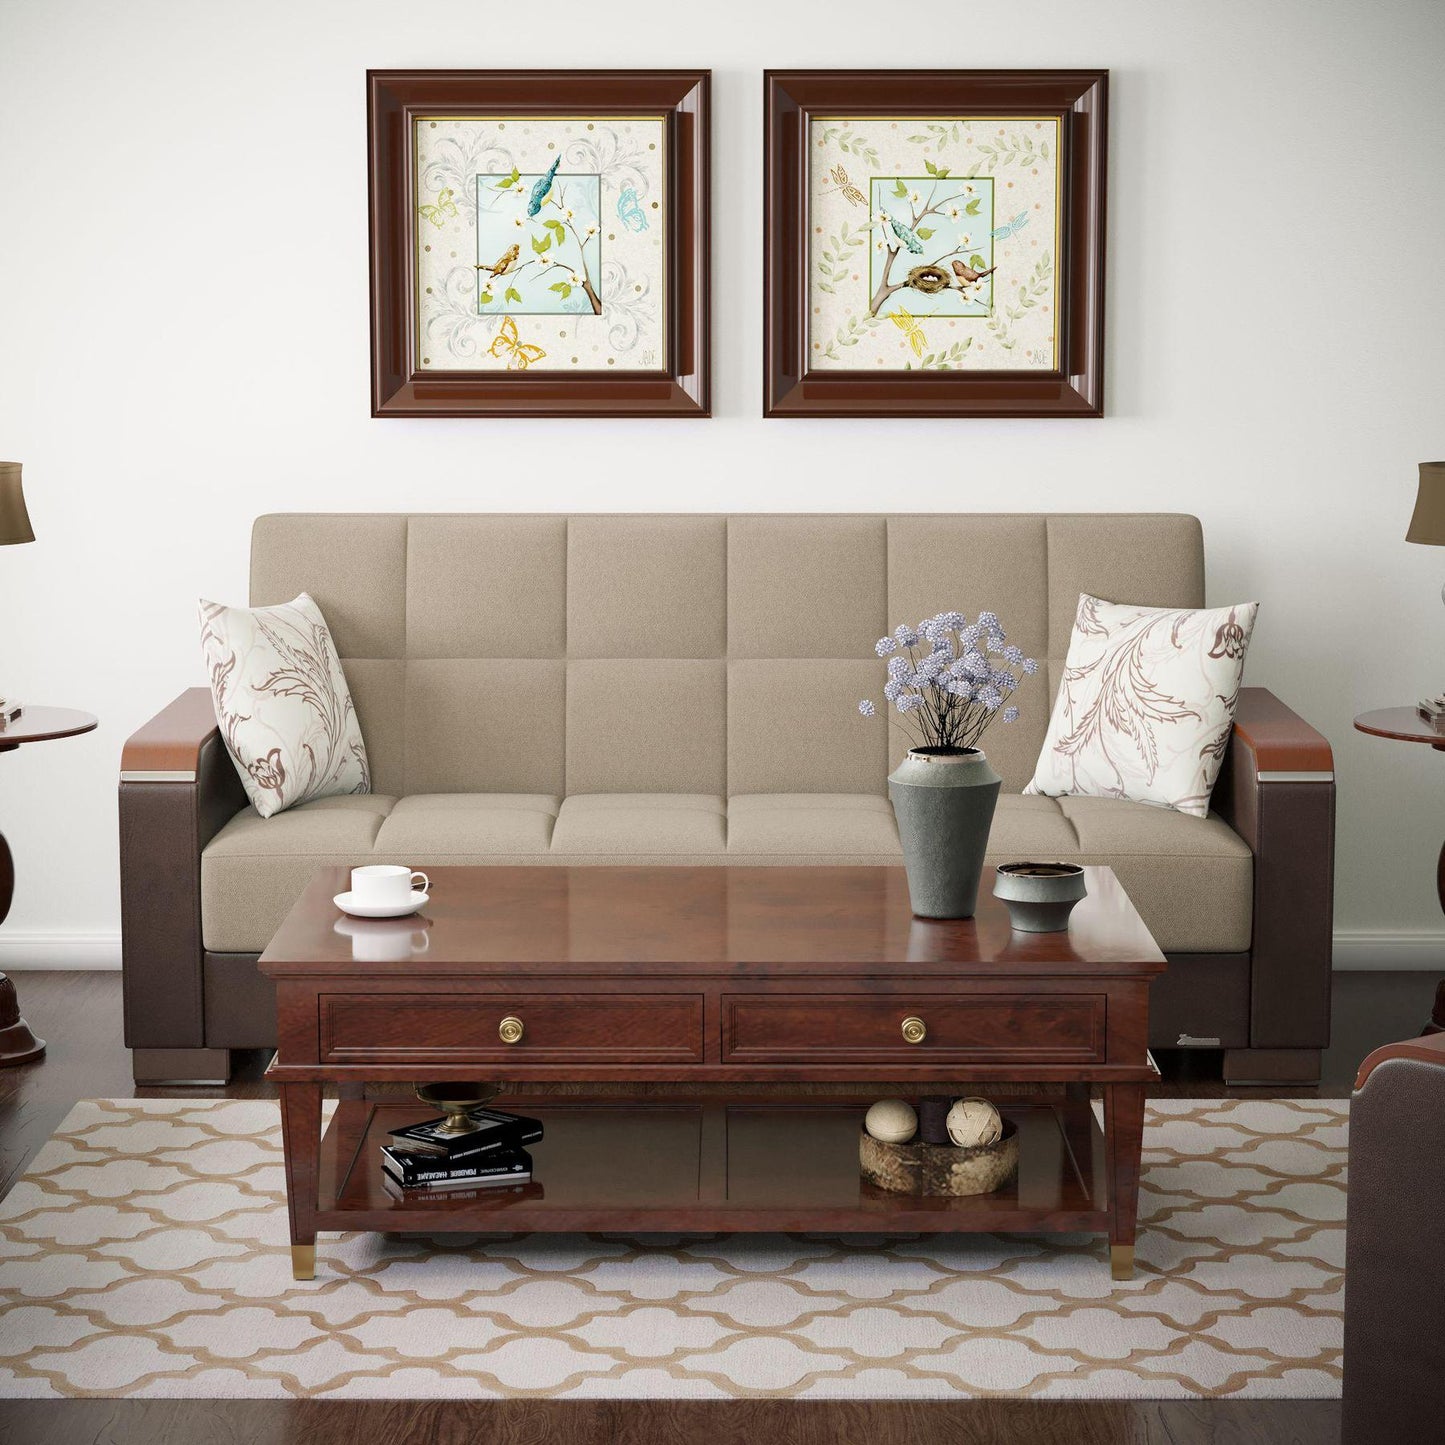 Modern design, Light Taupe, Dark Brown , Chenille, Artificial Leather upholstered convertible sleeper Sofabed with underseat storage from Voyage Luxe by Ottomanson in living room lifestyle setting by itself. This Sofabed measures 90 inches width by 36 inches depth by 41 inches height.